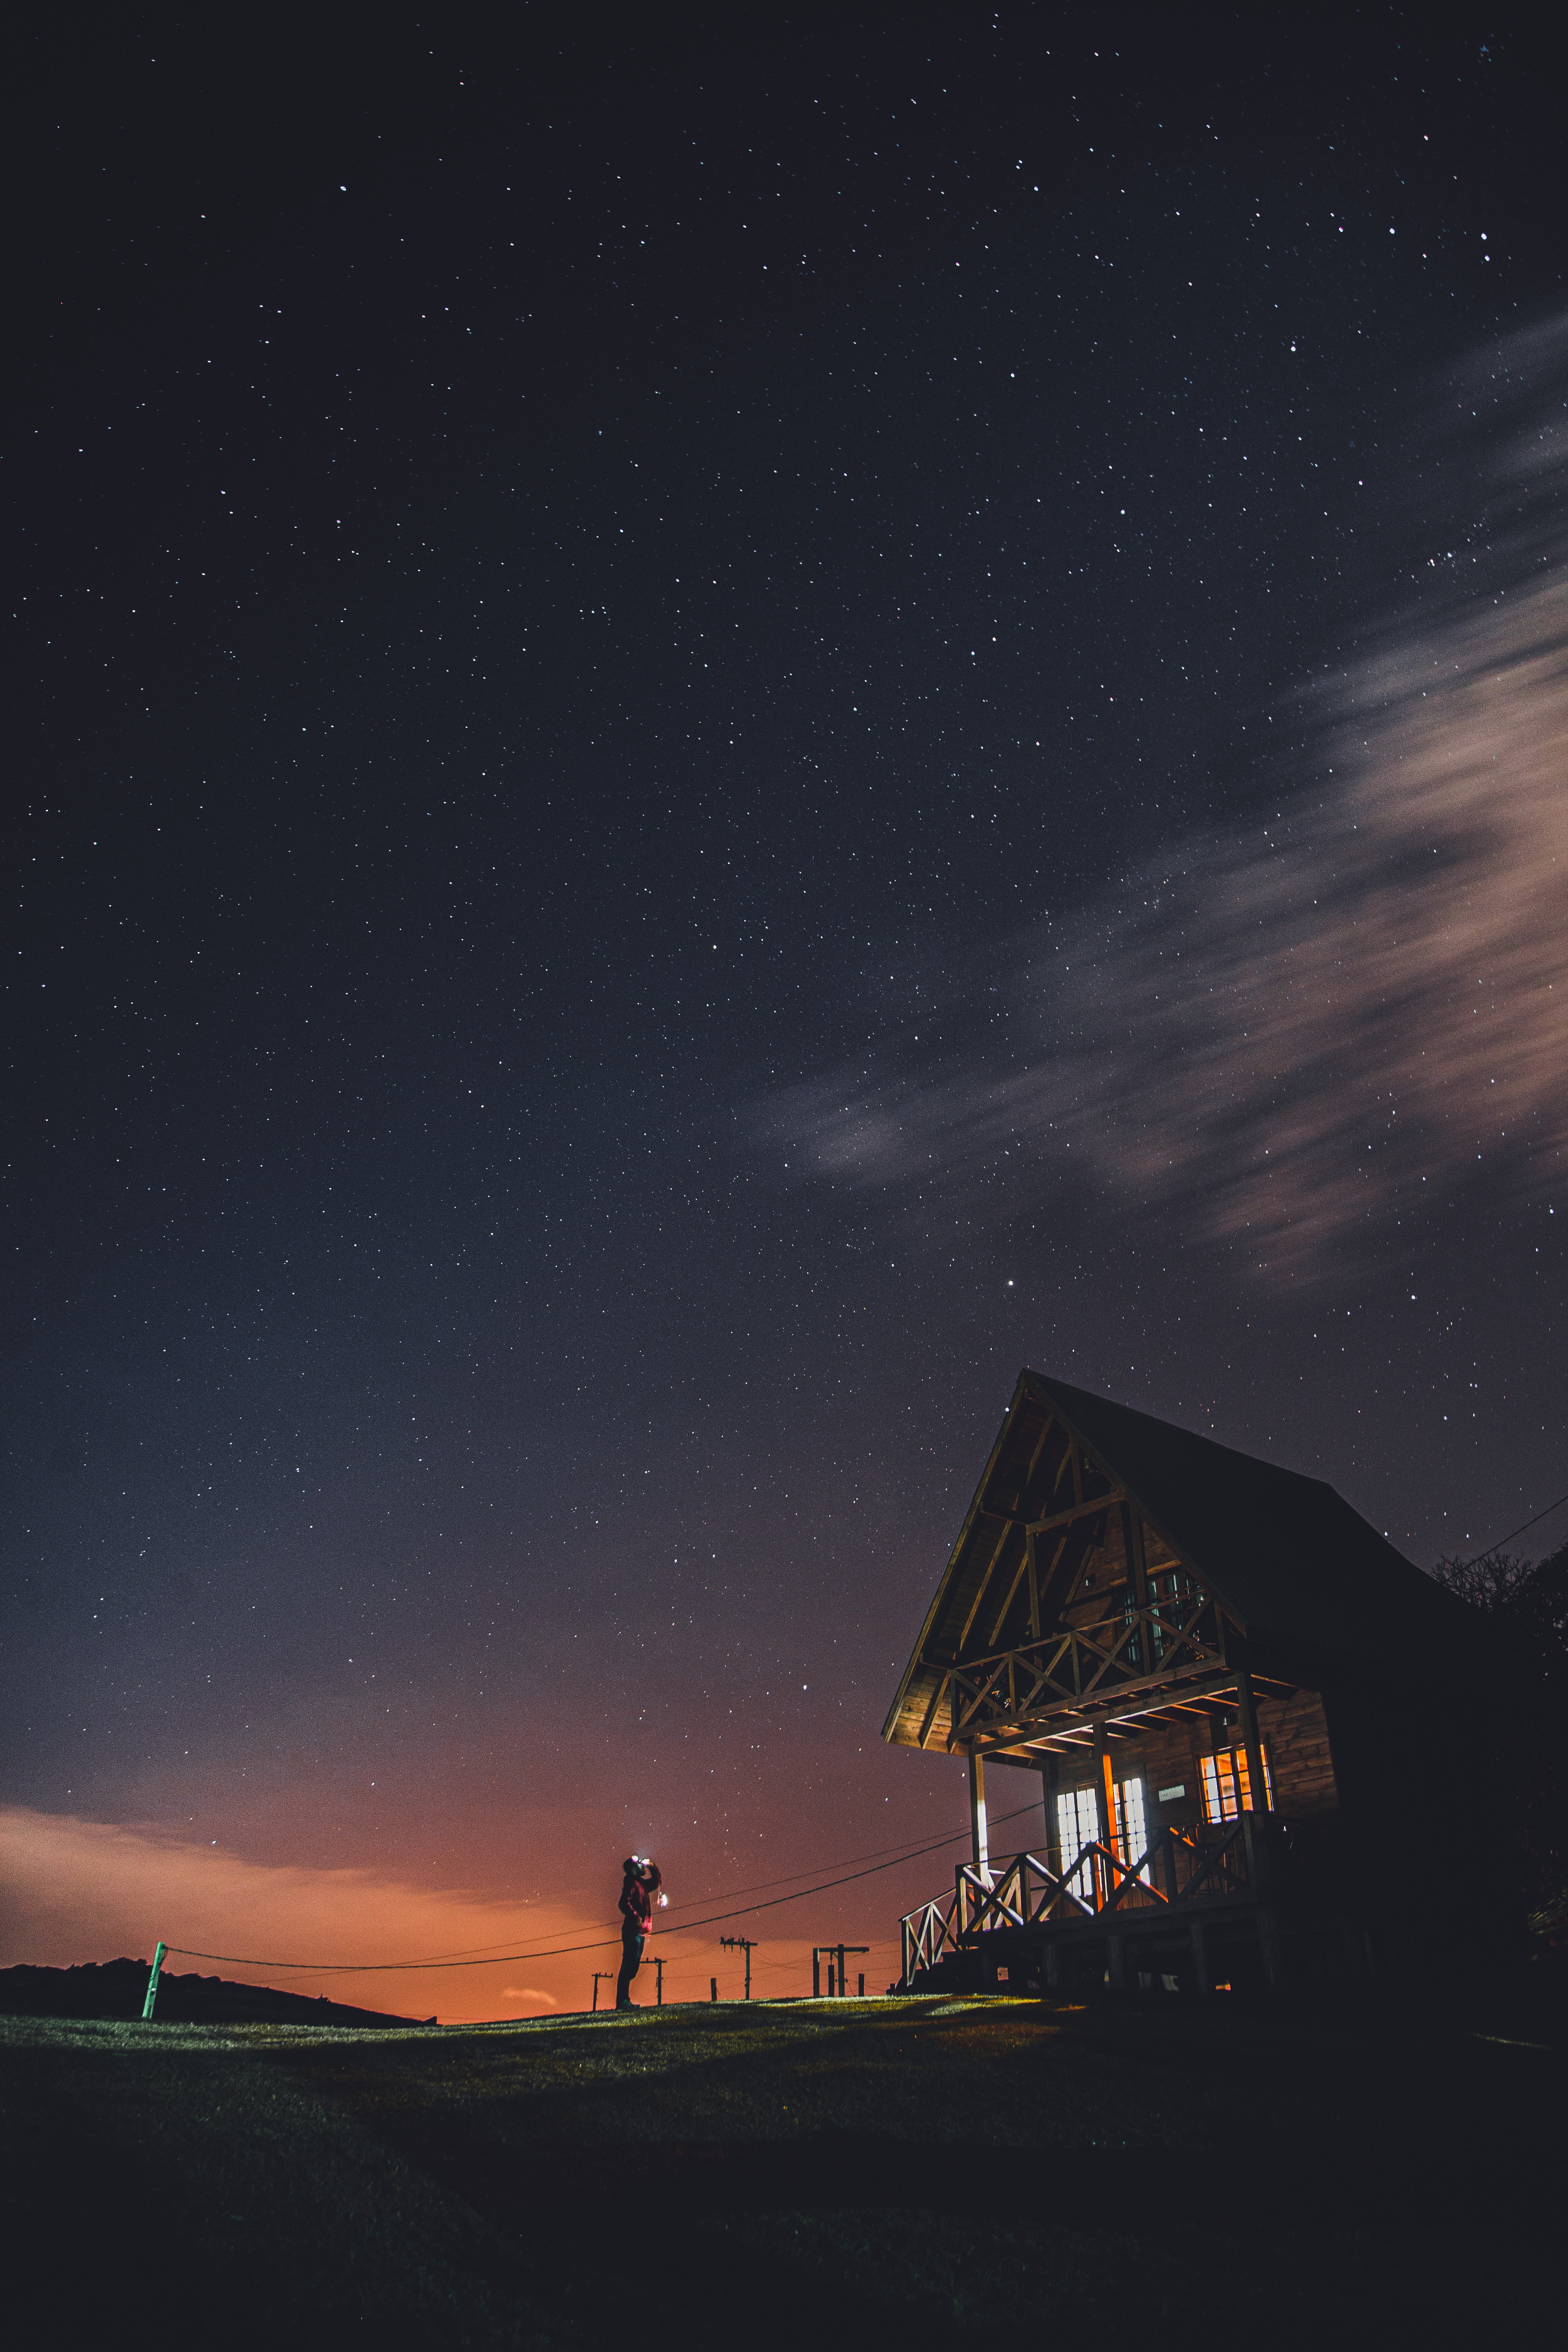 Hut House And Starry Night Wallpapers